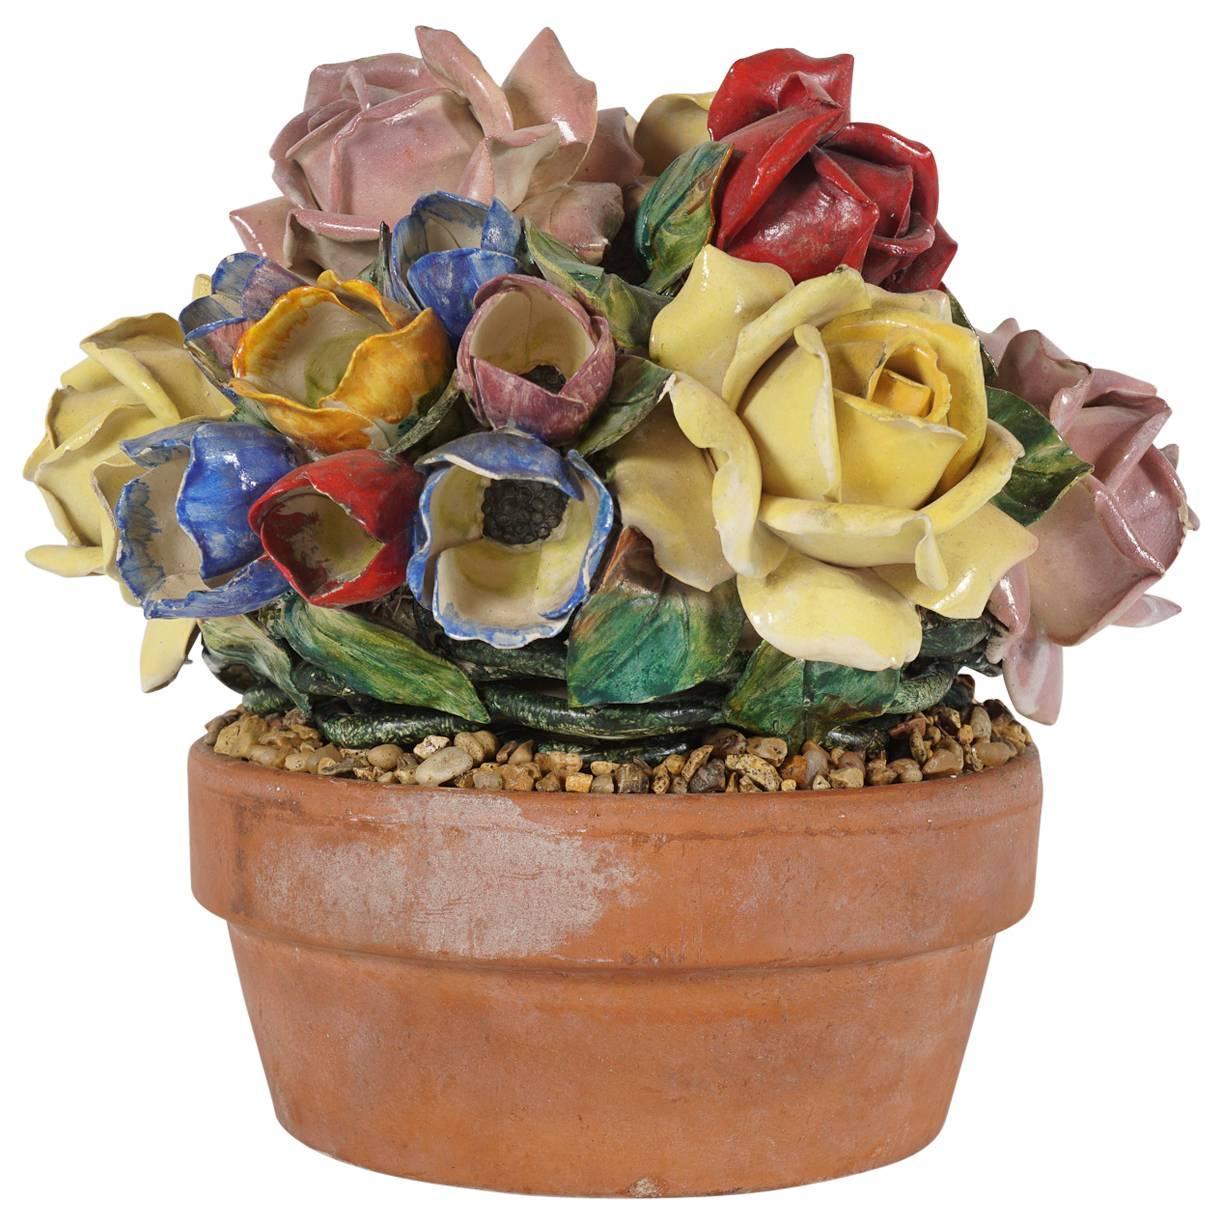 Glazed Ceramic and Terra Cotta Floral Arrangment from the Estate of Bunny Mellon